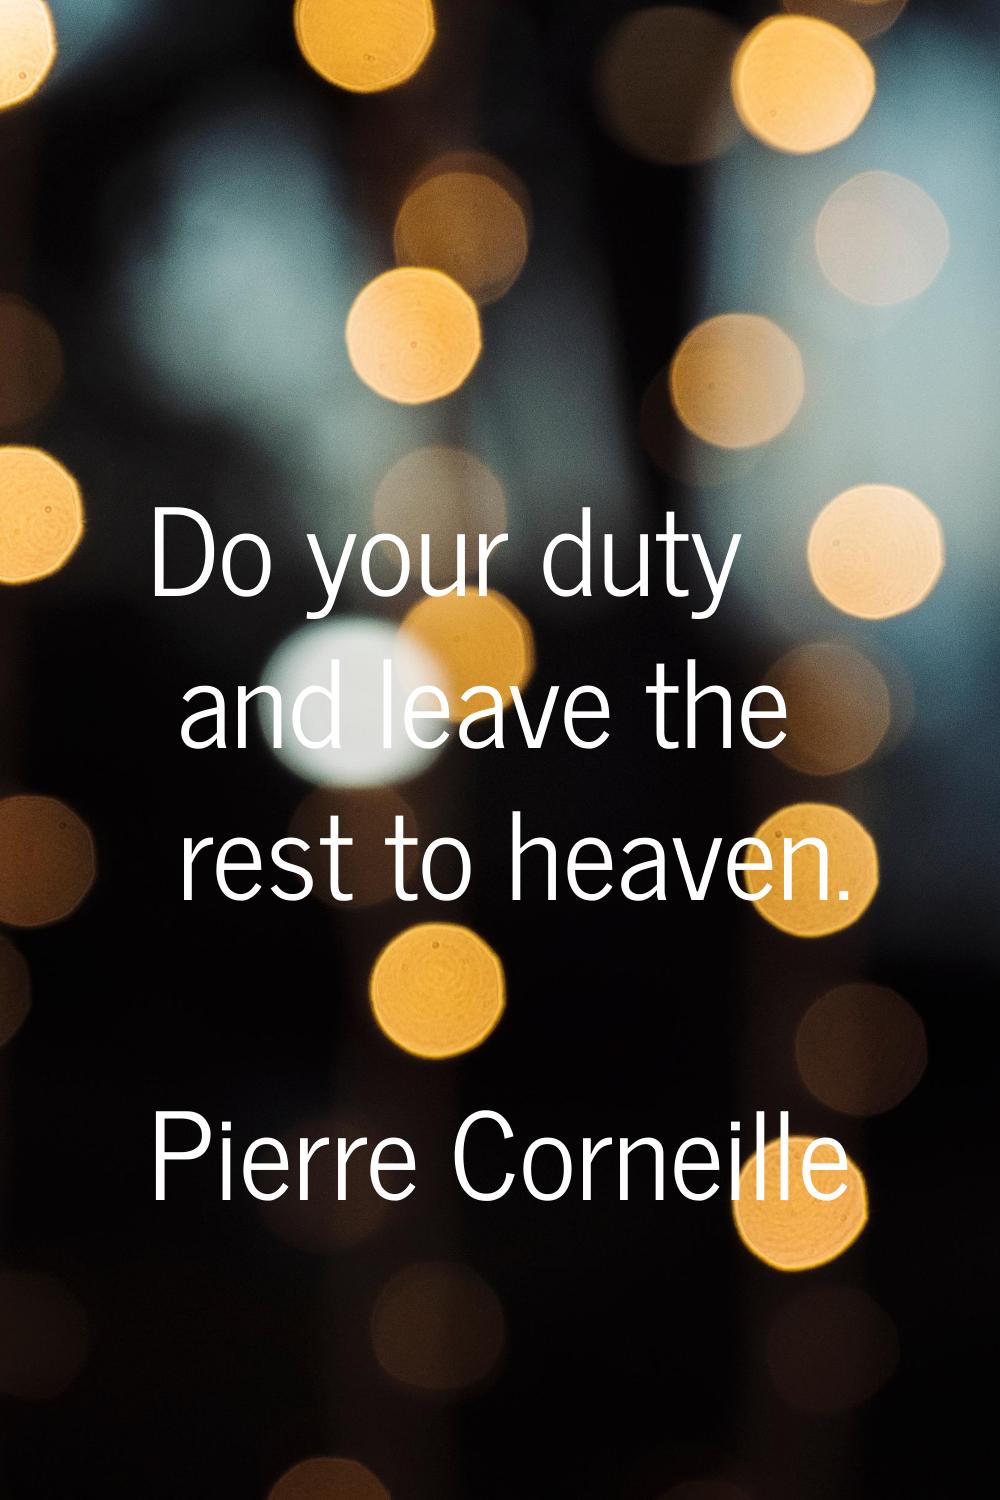 Do your duty and leave the rest to heaven.